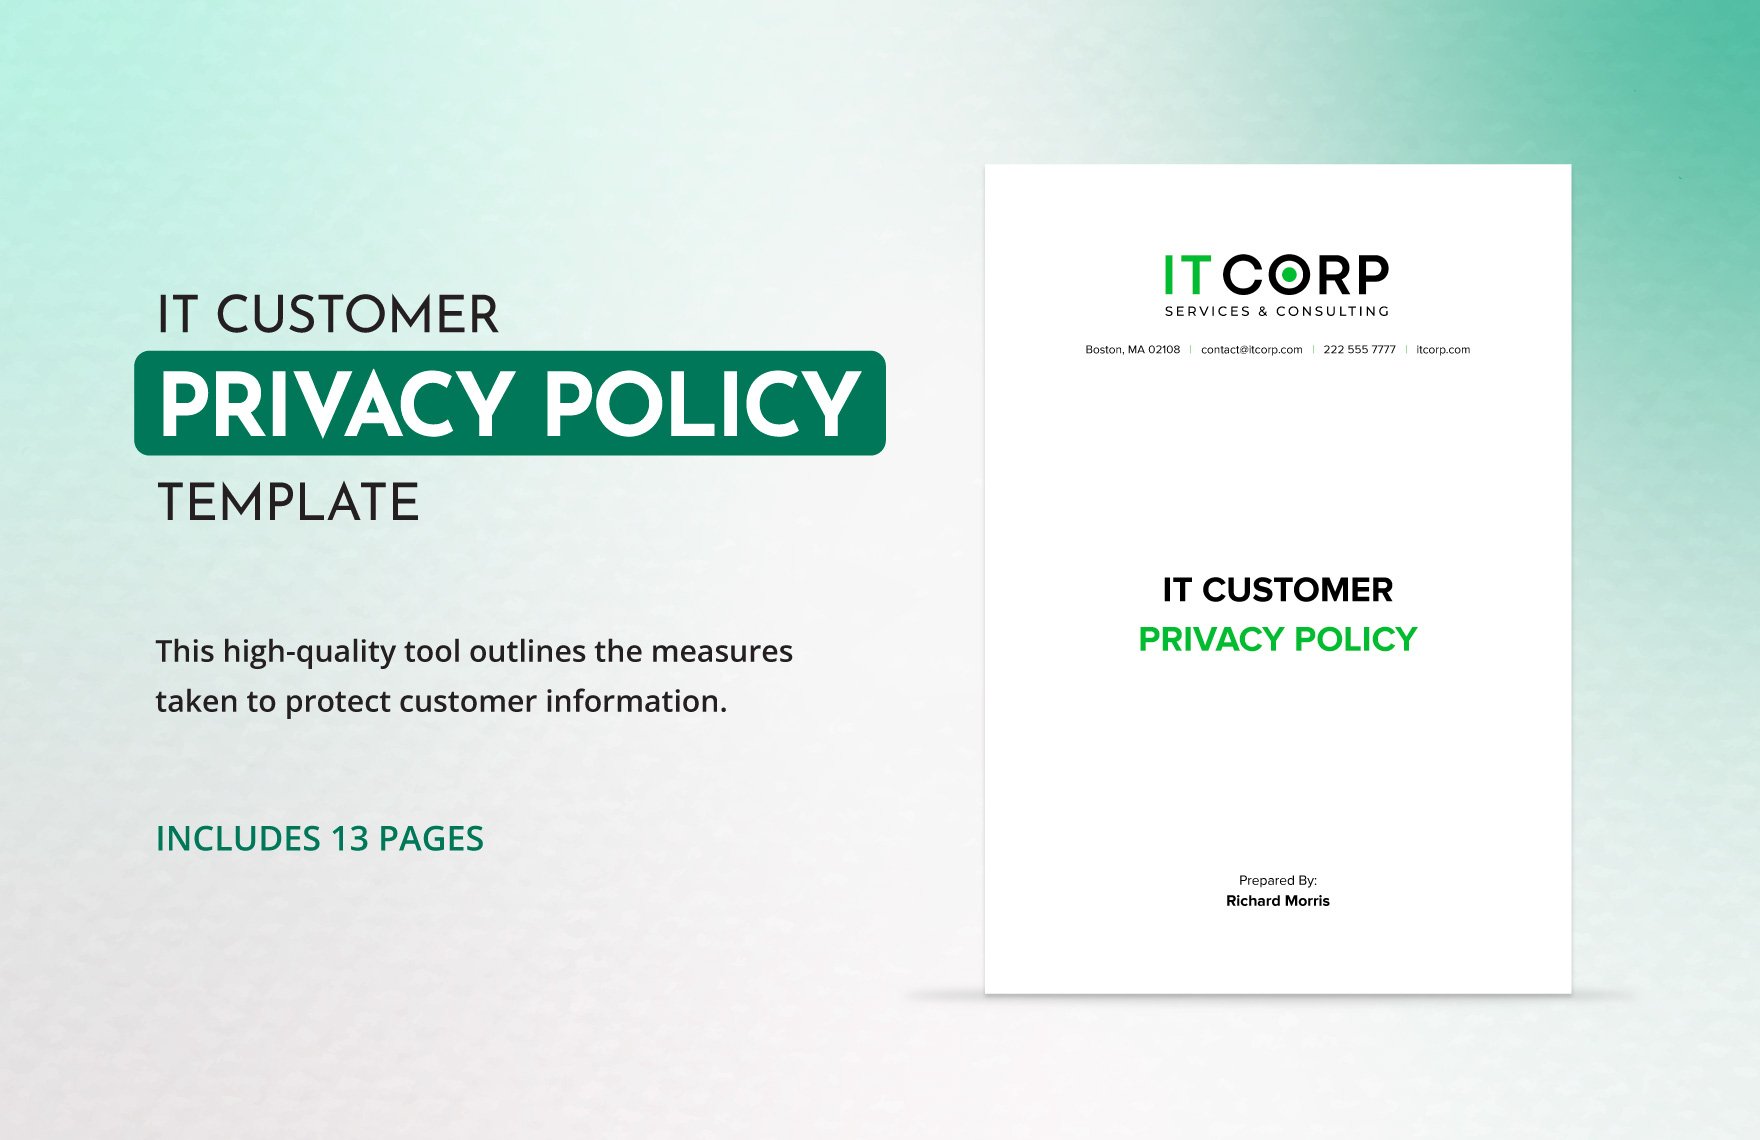 IT Customer Privacy Policy Template